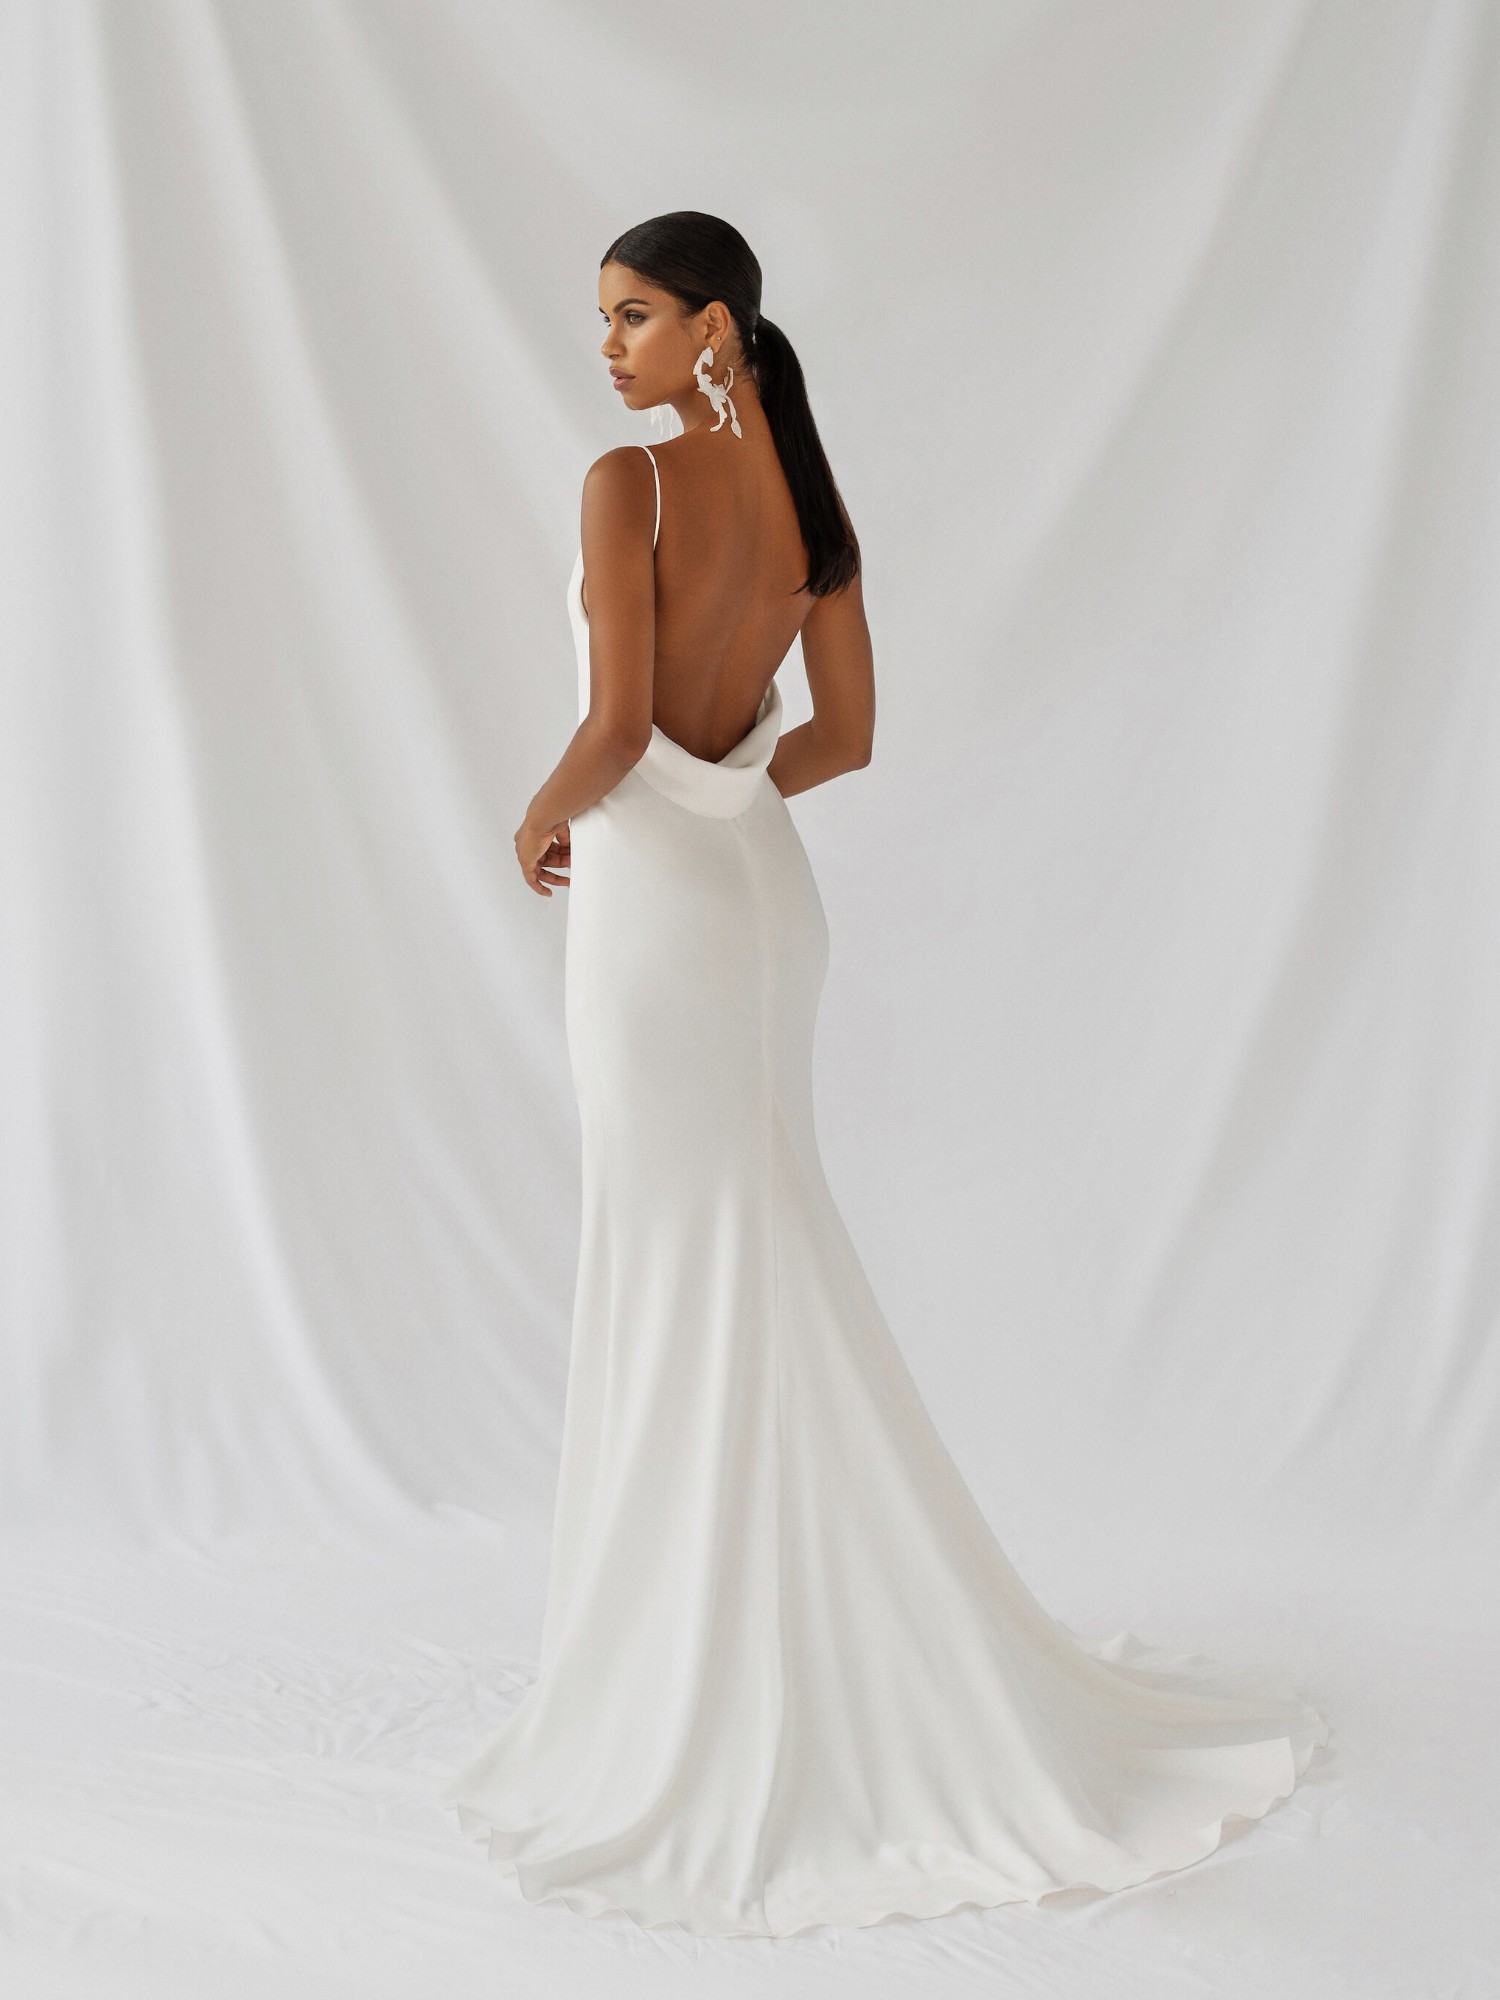 Lotus Gown Inspirated By Botanica of Alexandra Grecco 2021 Bridal Collection